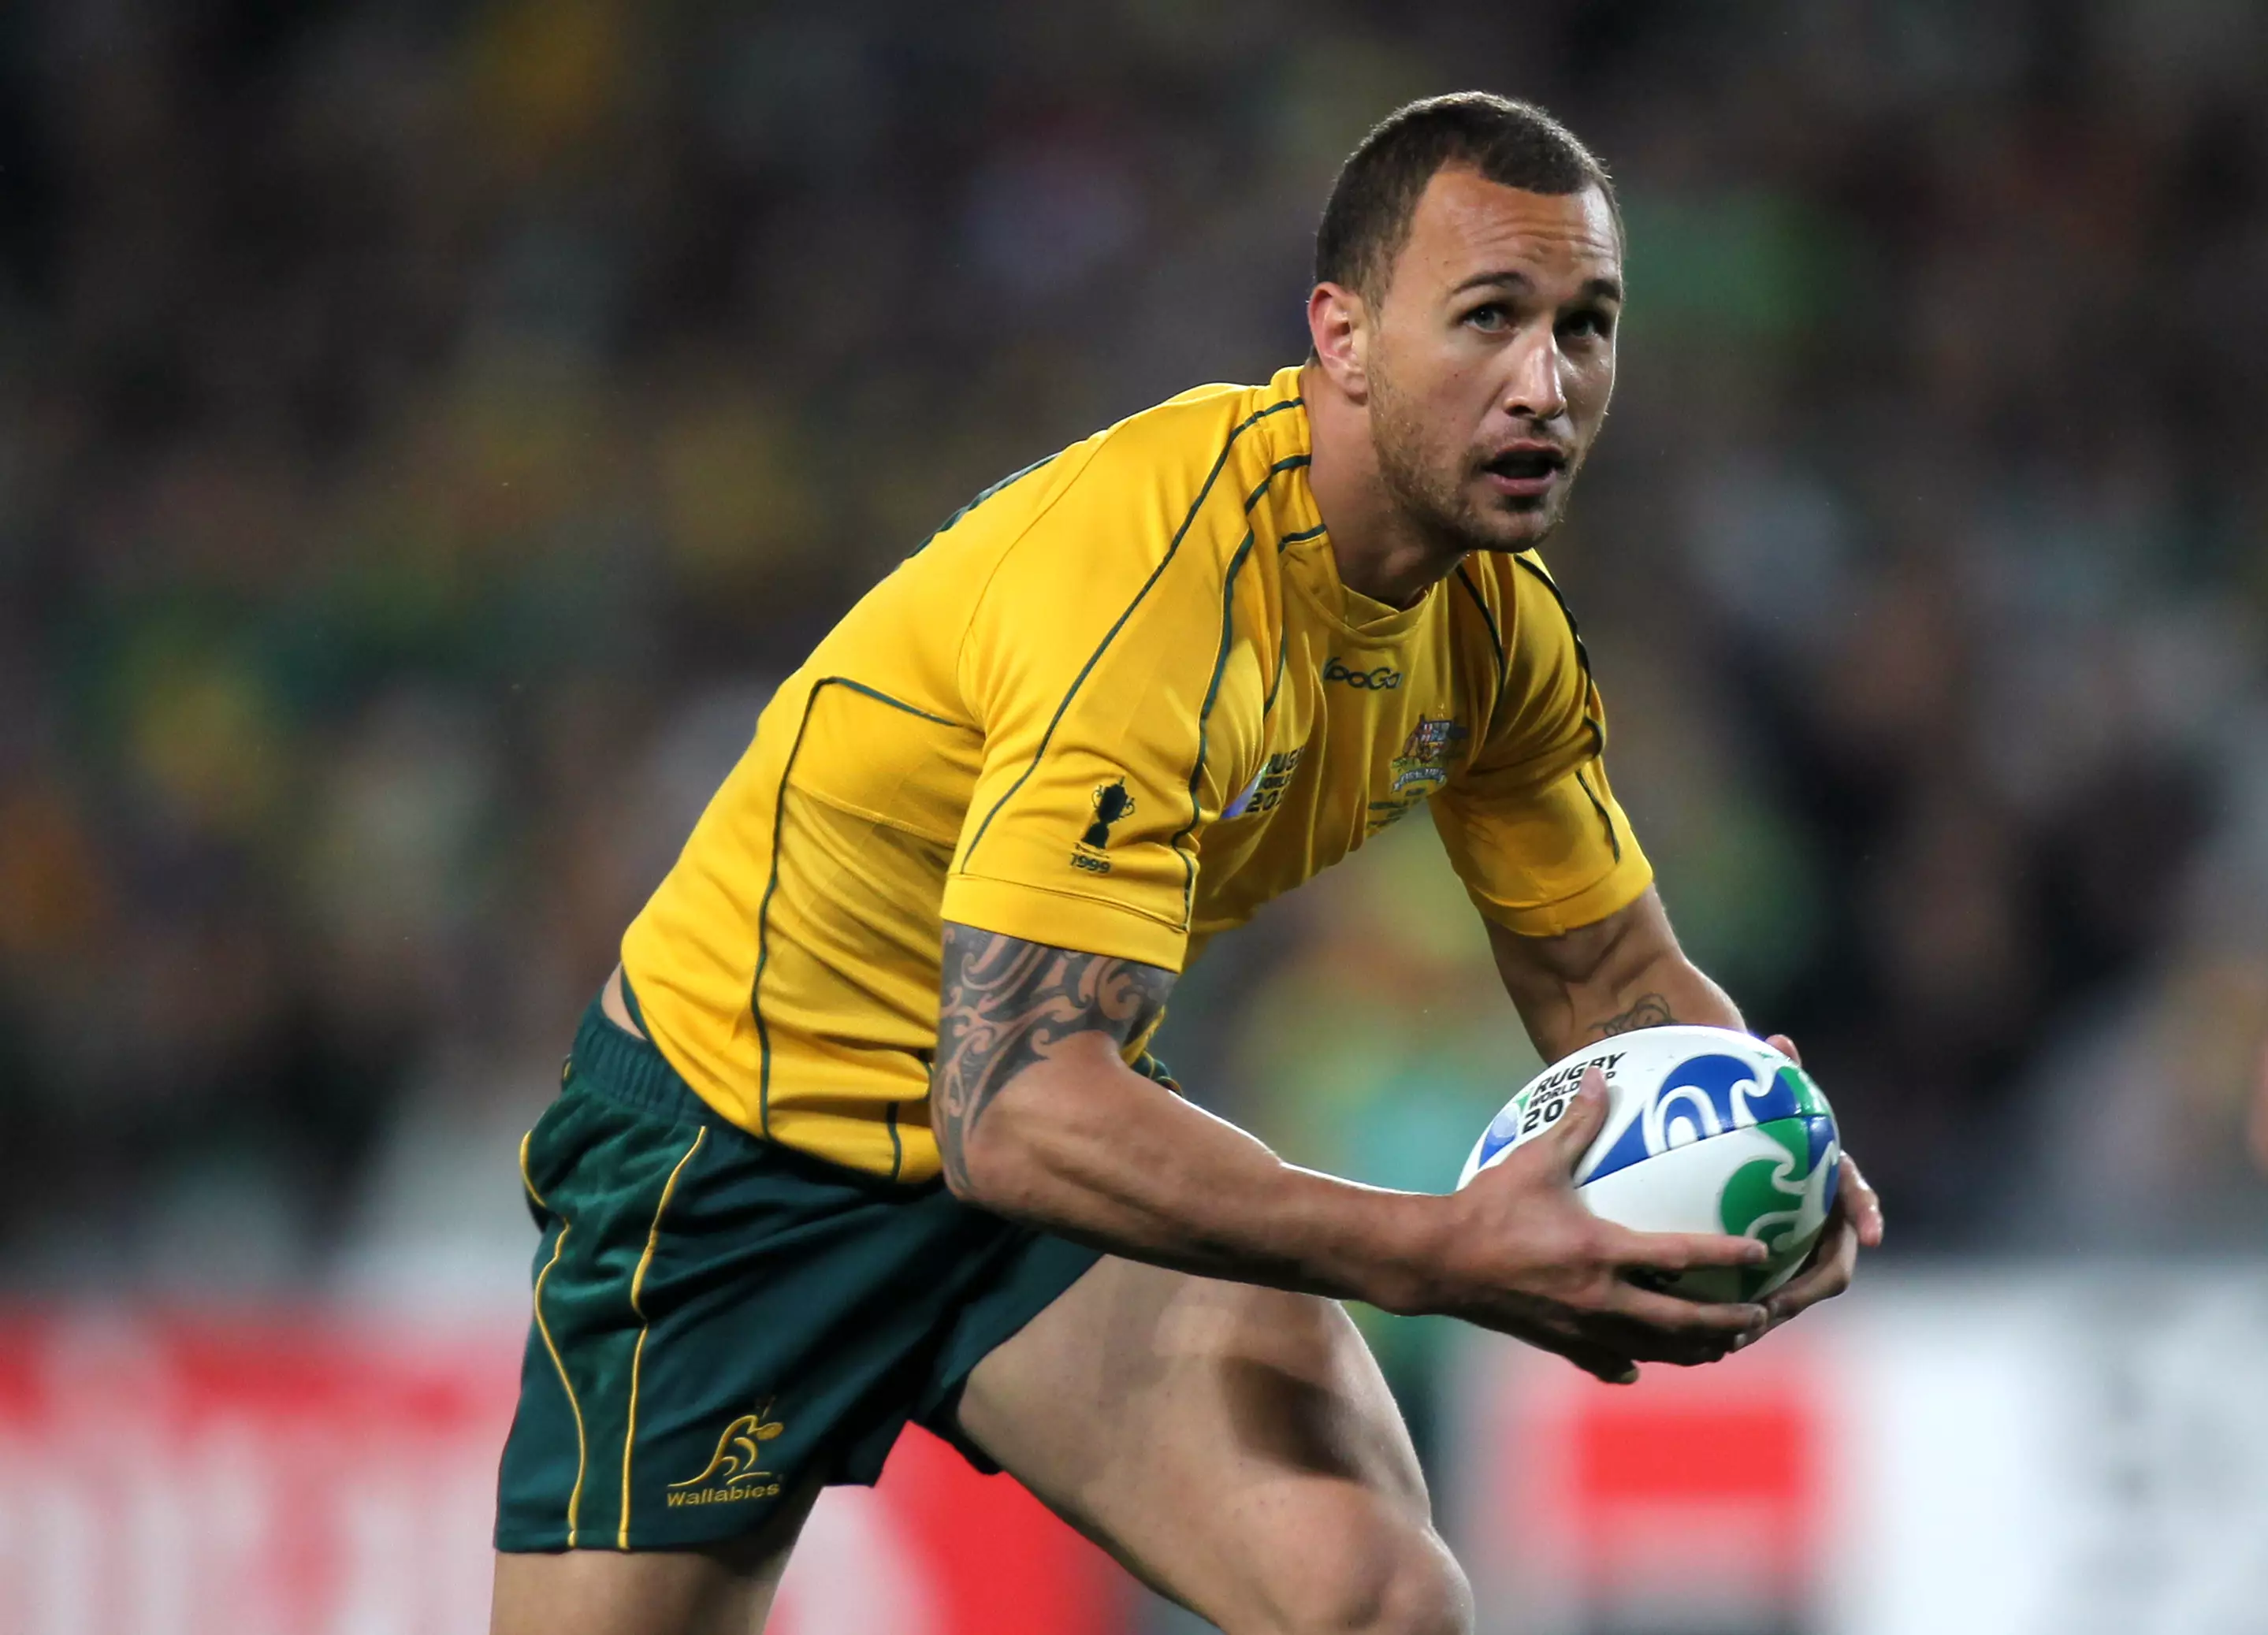 Cooper has made 70 appearances for the Wallabies.